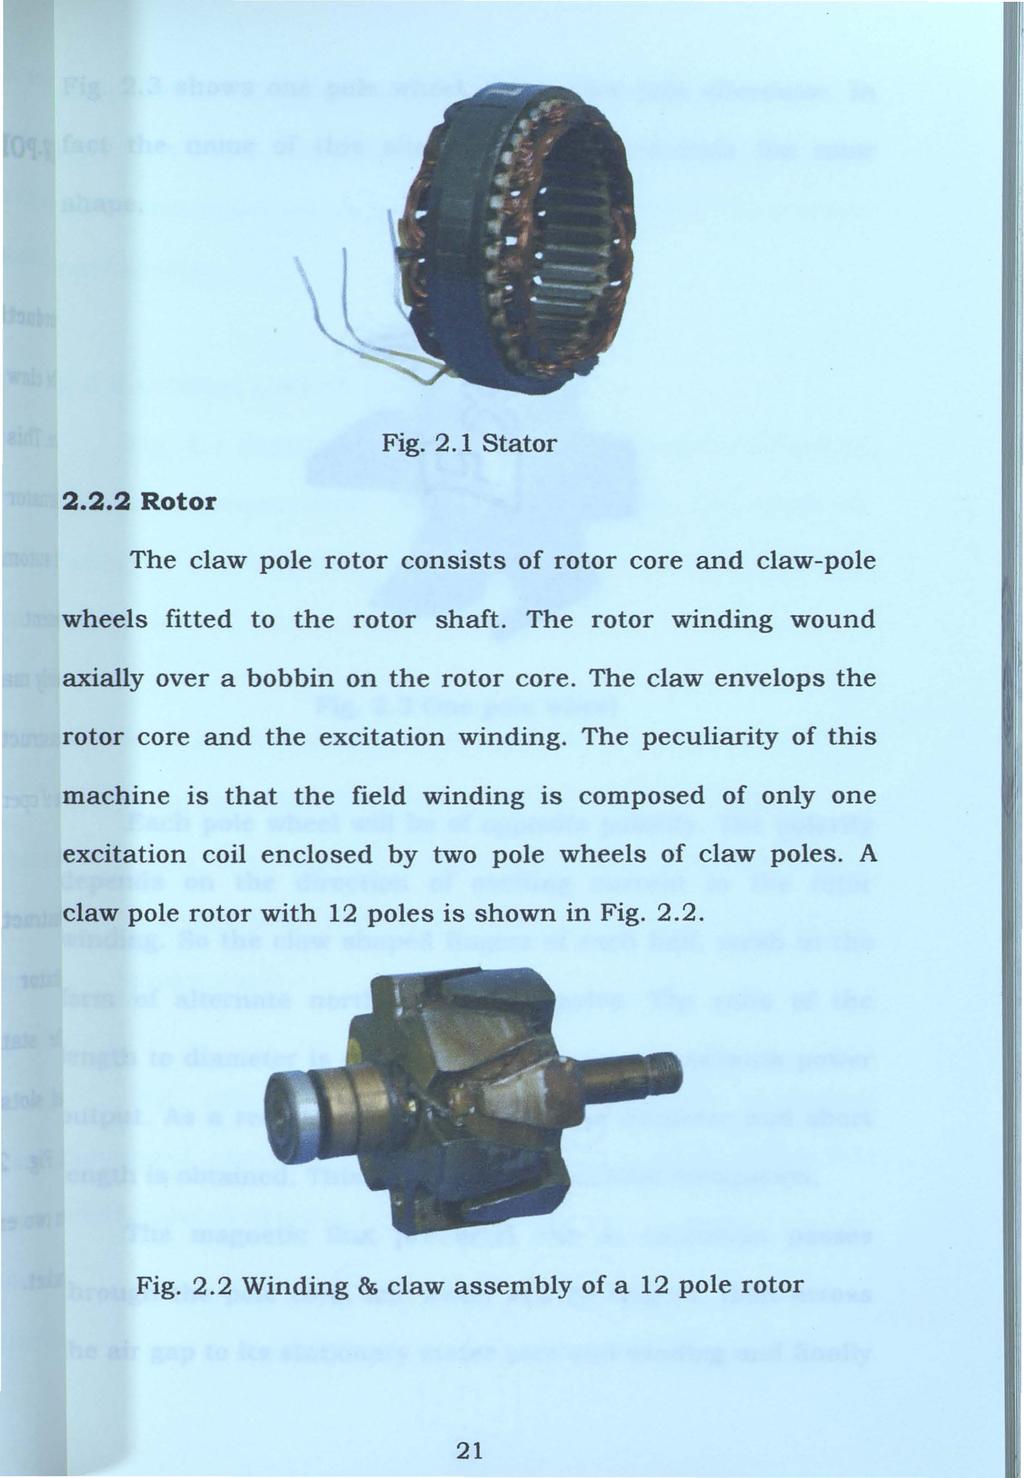 Fig. 2. 1 Stator 2.2.2 Rotor The claw pole rotor consists of rotor core and claw-pole wheels fitted to the rotor shaft. The rotor winding wound axially over a bobbin on the rotor core.